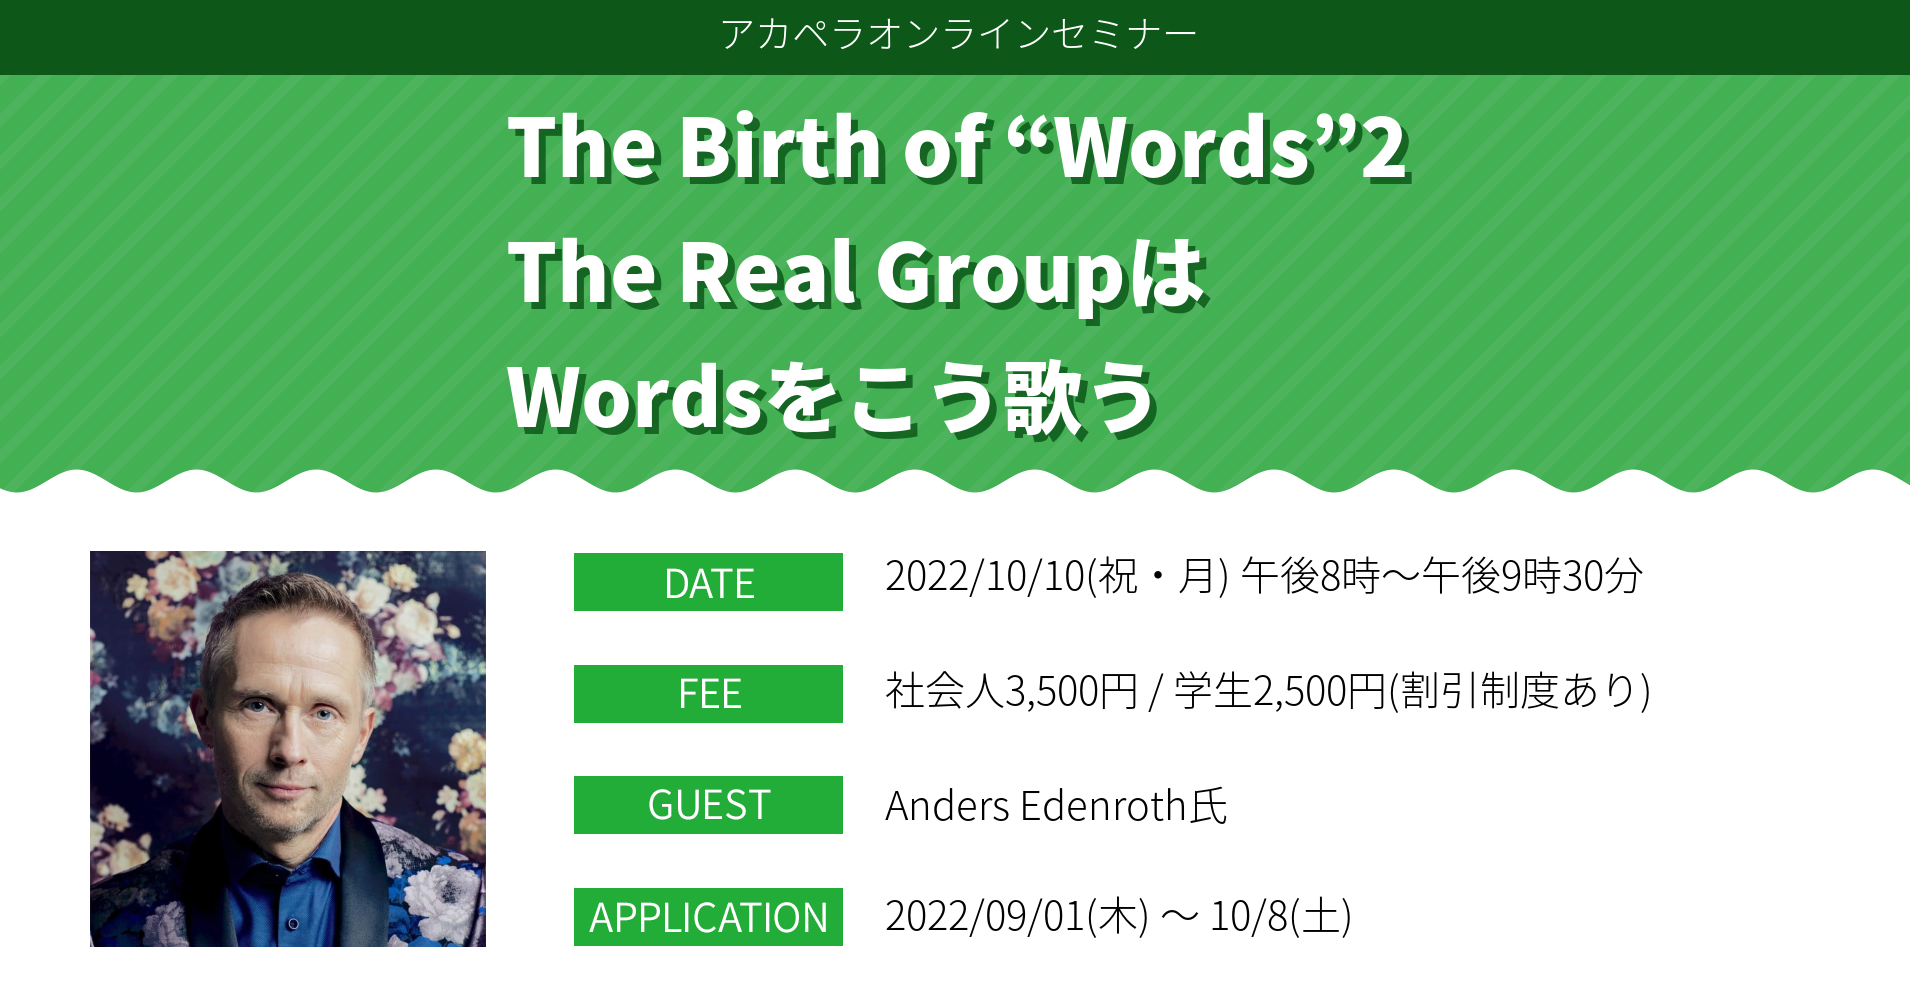 The Birth of “Words” 2 ～The Real GroupはWordsをこう歌う～